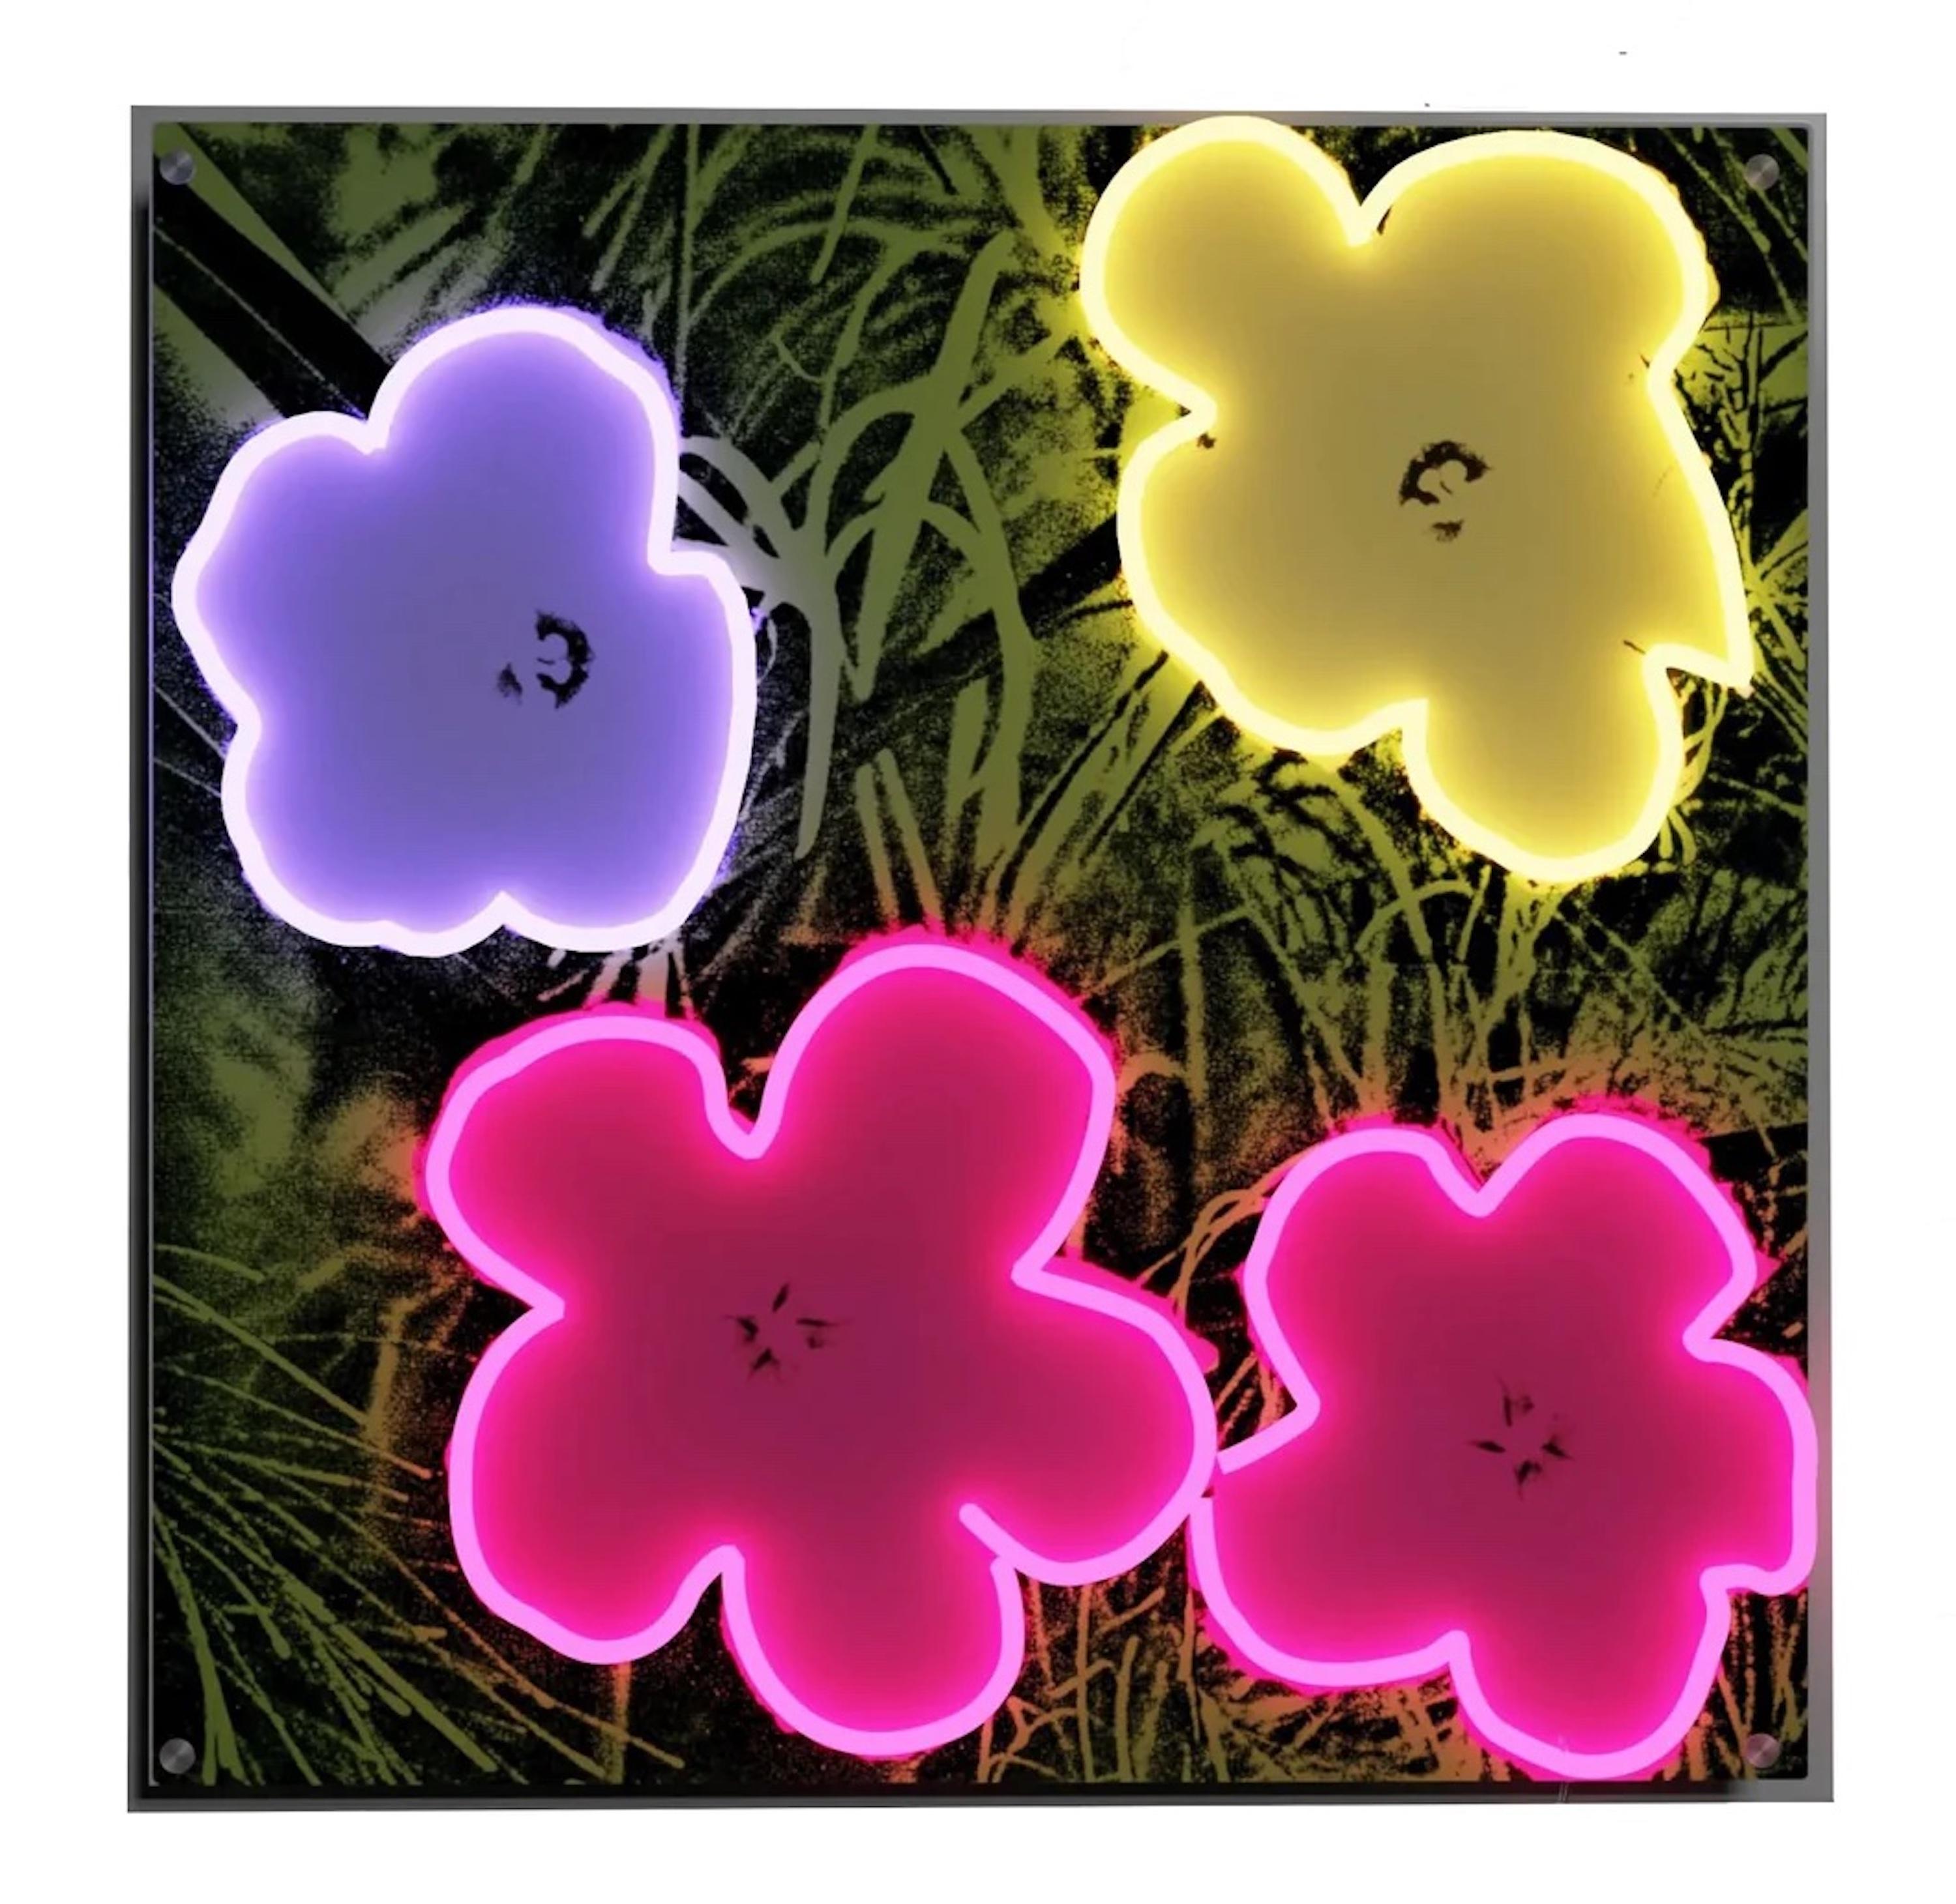 Yellowpop Neon Flowers lighted Wall Hanging/Sign - brand new in box - Art by Andy Warhol